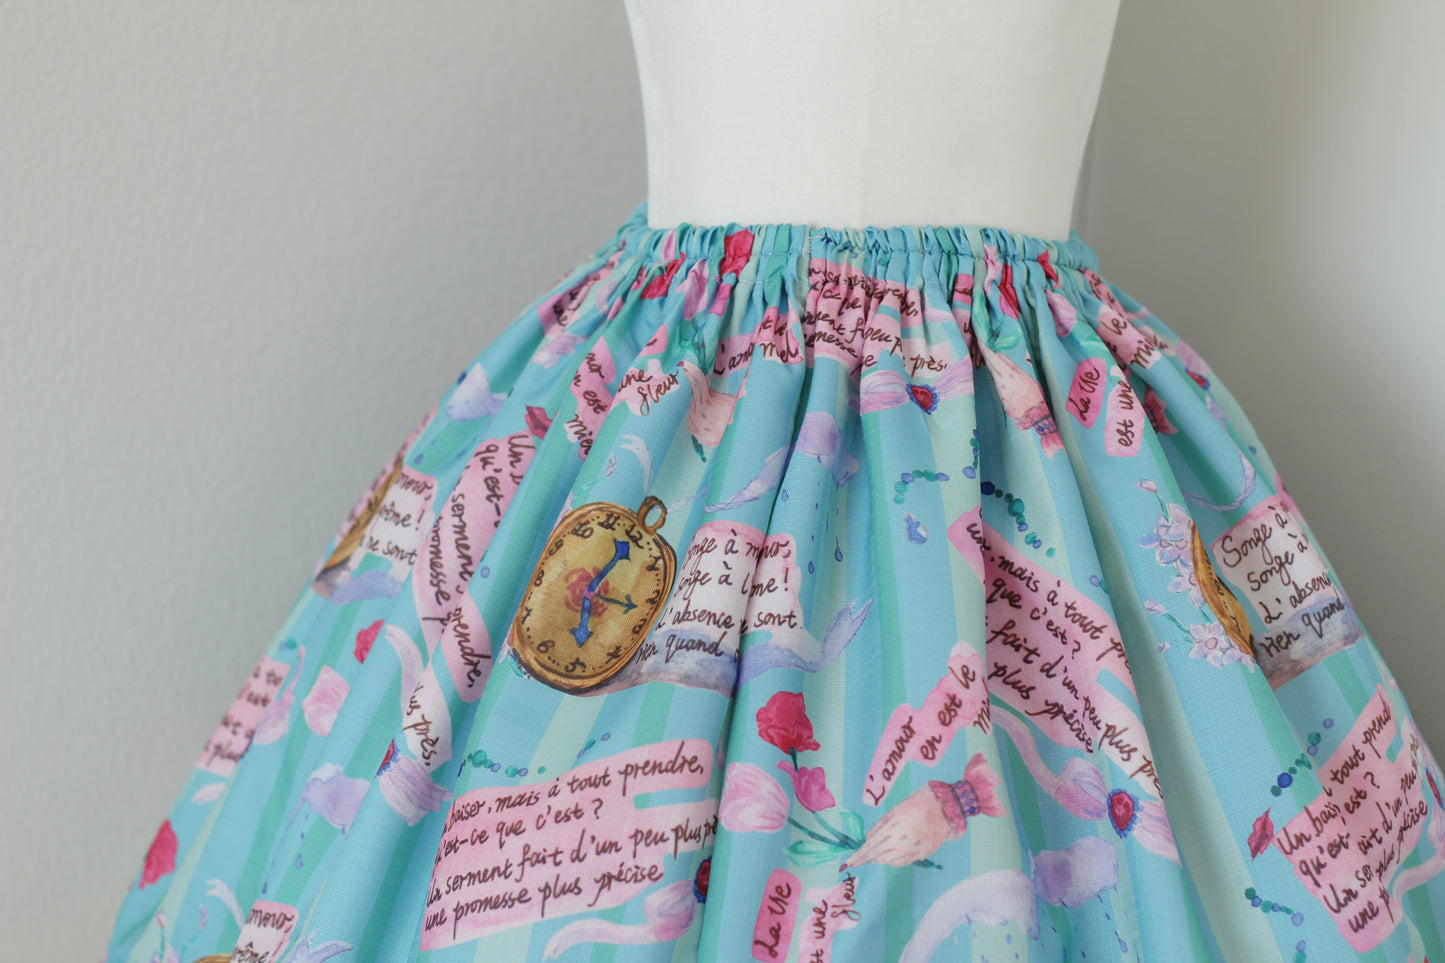 The French Poetry. Handmade Lolita Skirt with Decoration.